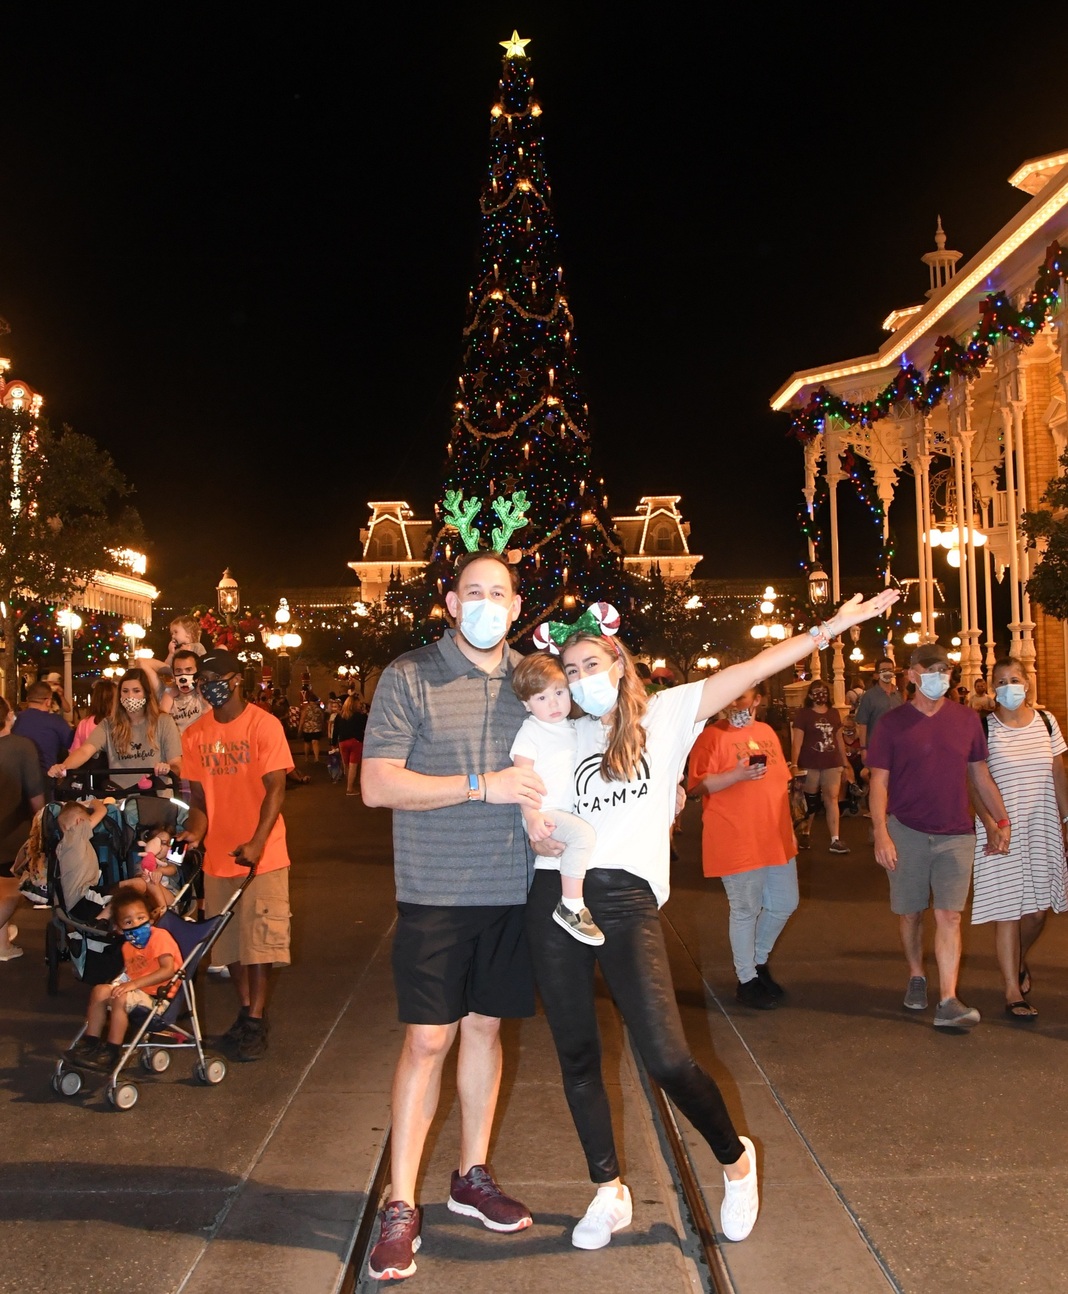 The Holidays at Walt Disney World: They're Alive, Even During COVID! Sandra Jacquemin Contributor Miami Mom Collective